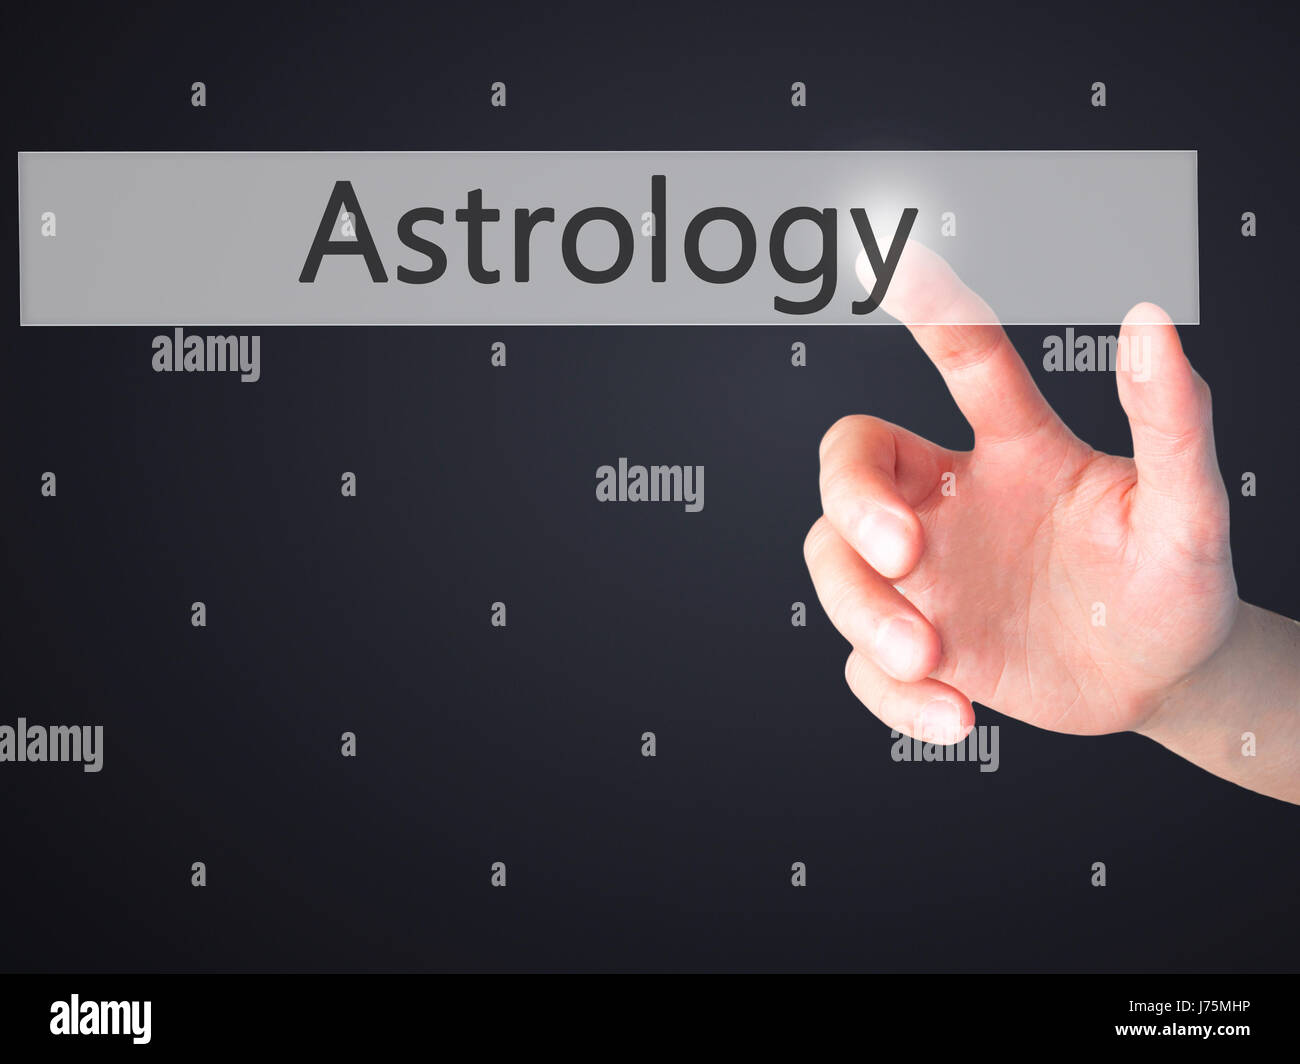 Astrology - Hand pressing a button on blurred background concept . Business, technology, internet concept. Stock Photo Stock Photo